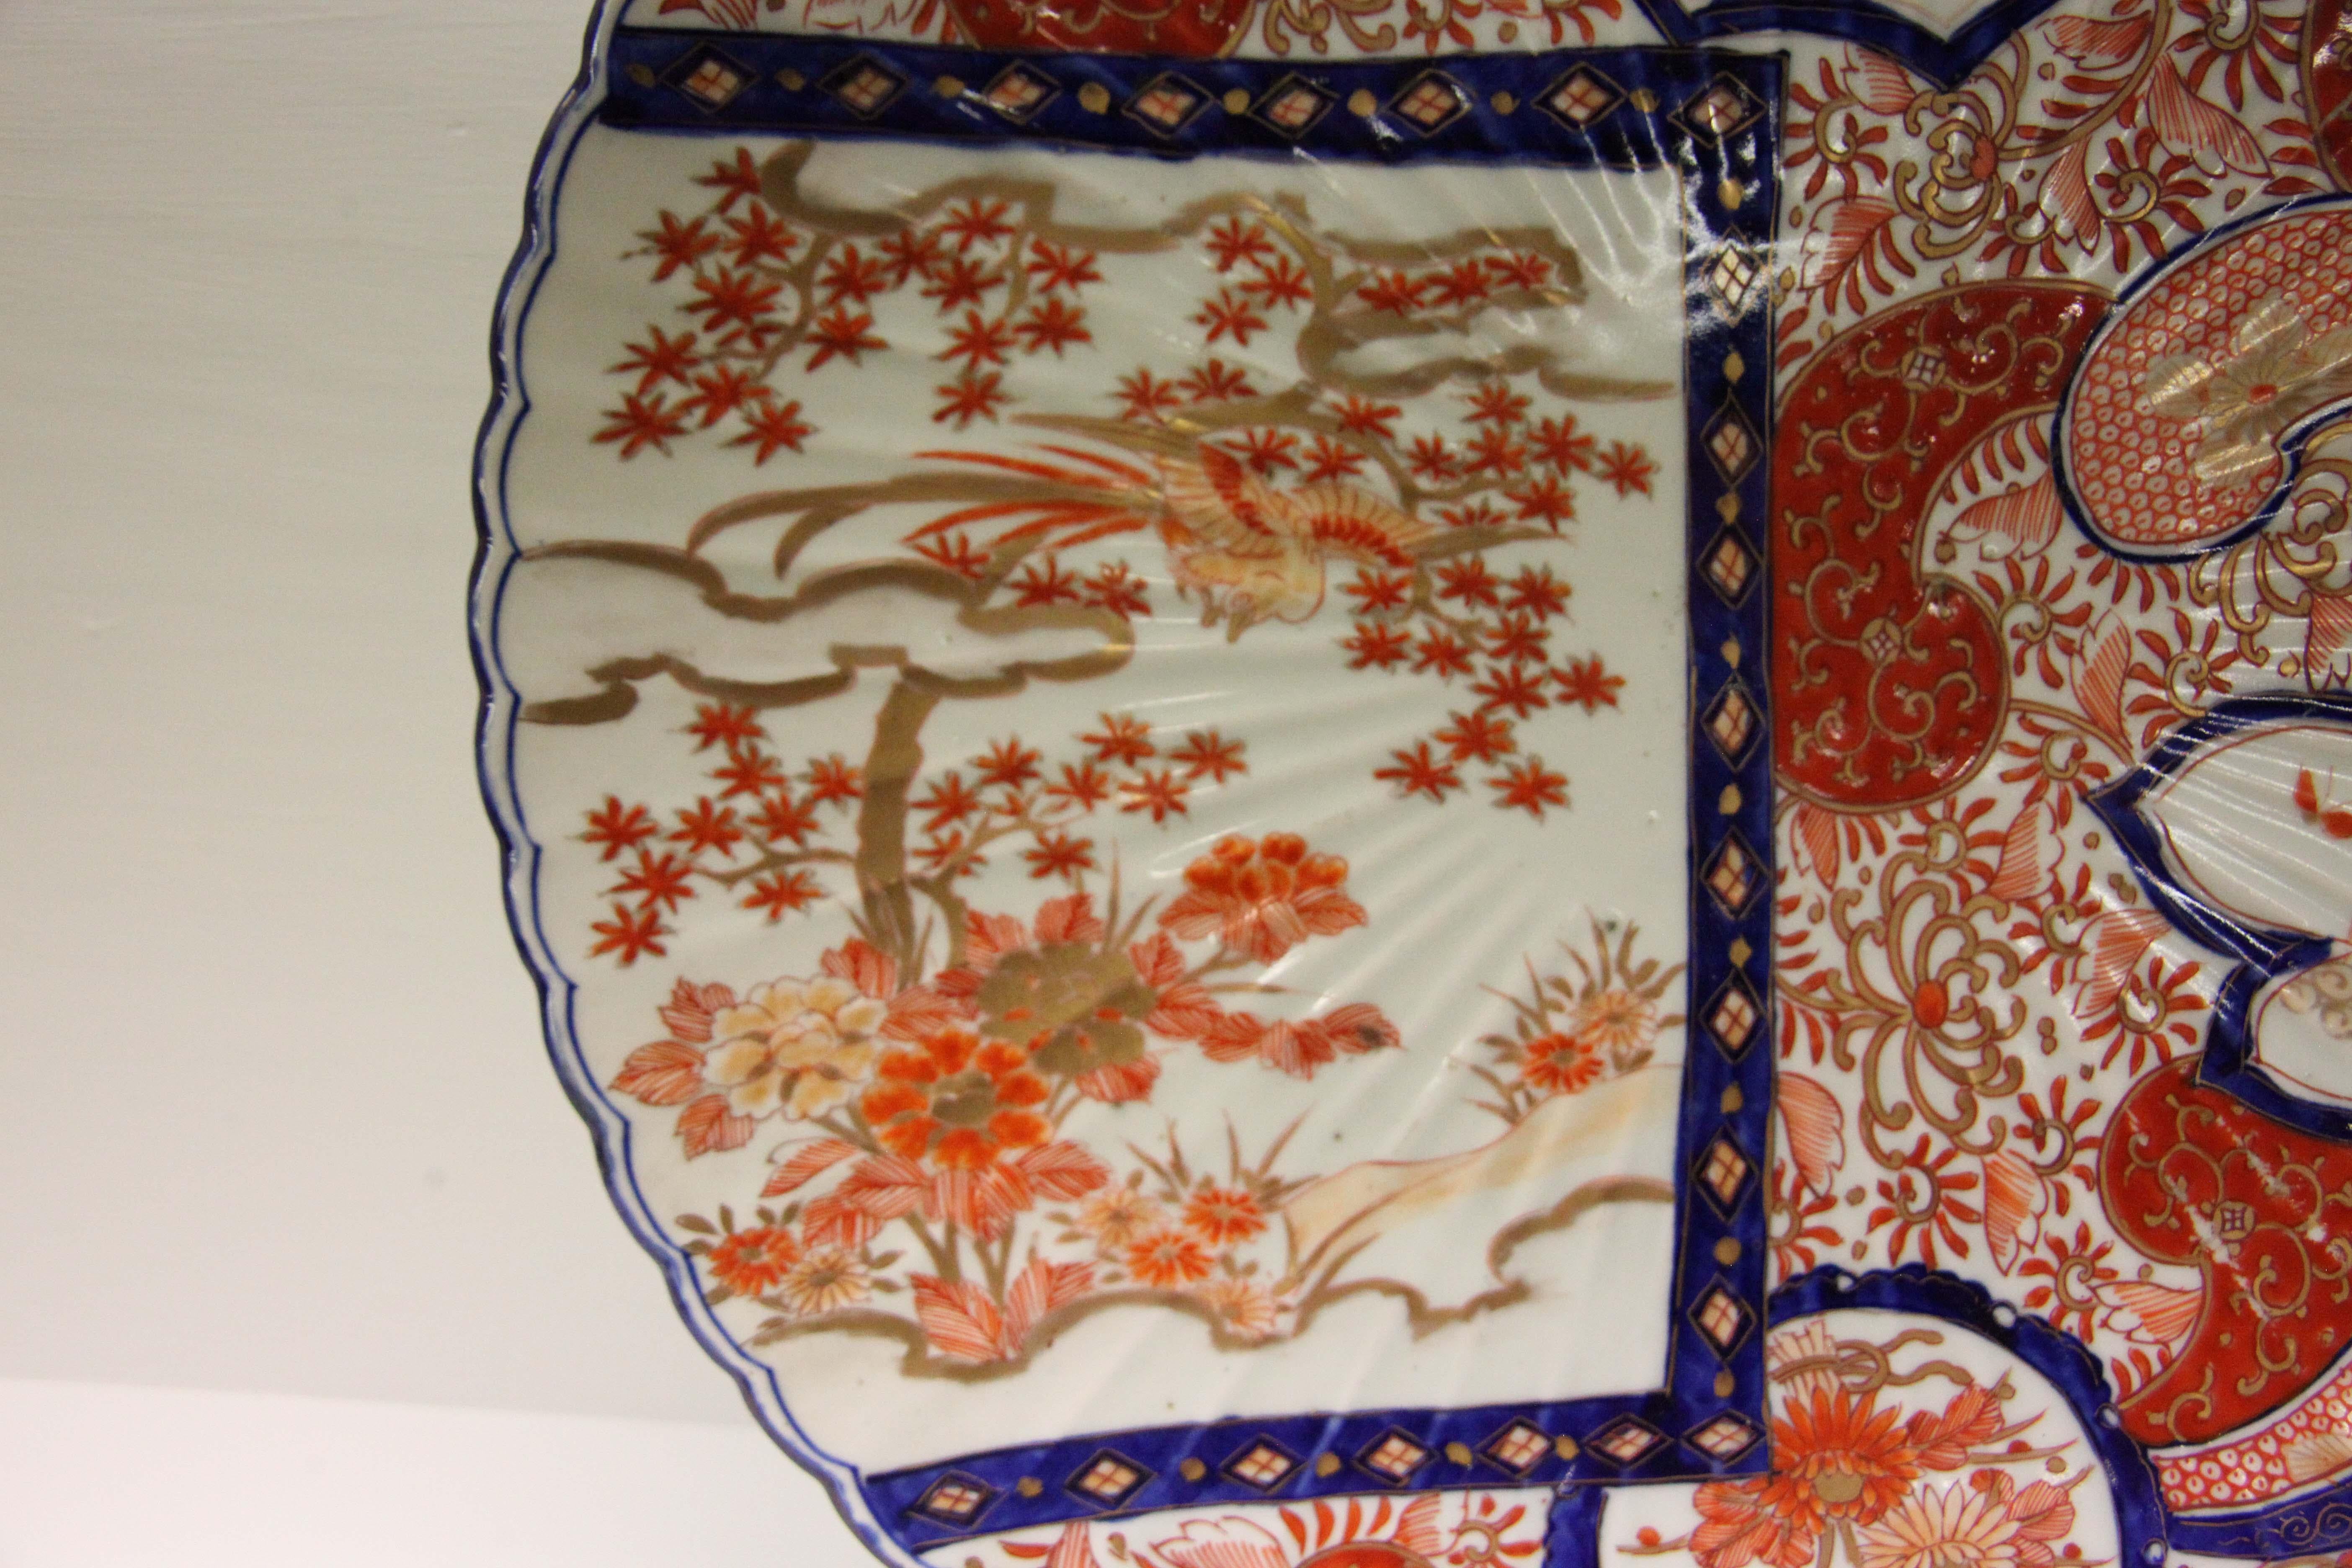 19th century Japanese Imari charger with scalloped edge, all-over floral pattern interspersed with multi shaped panels filled flowers and dragonflies.